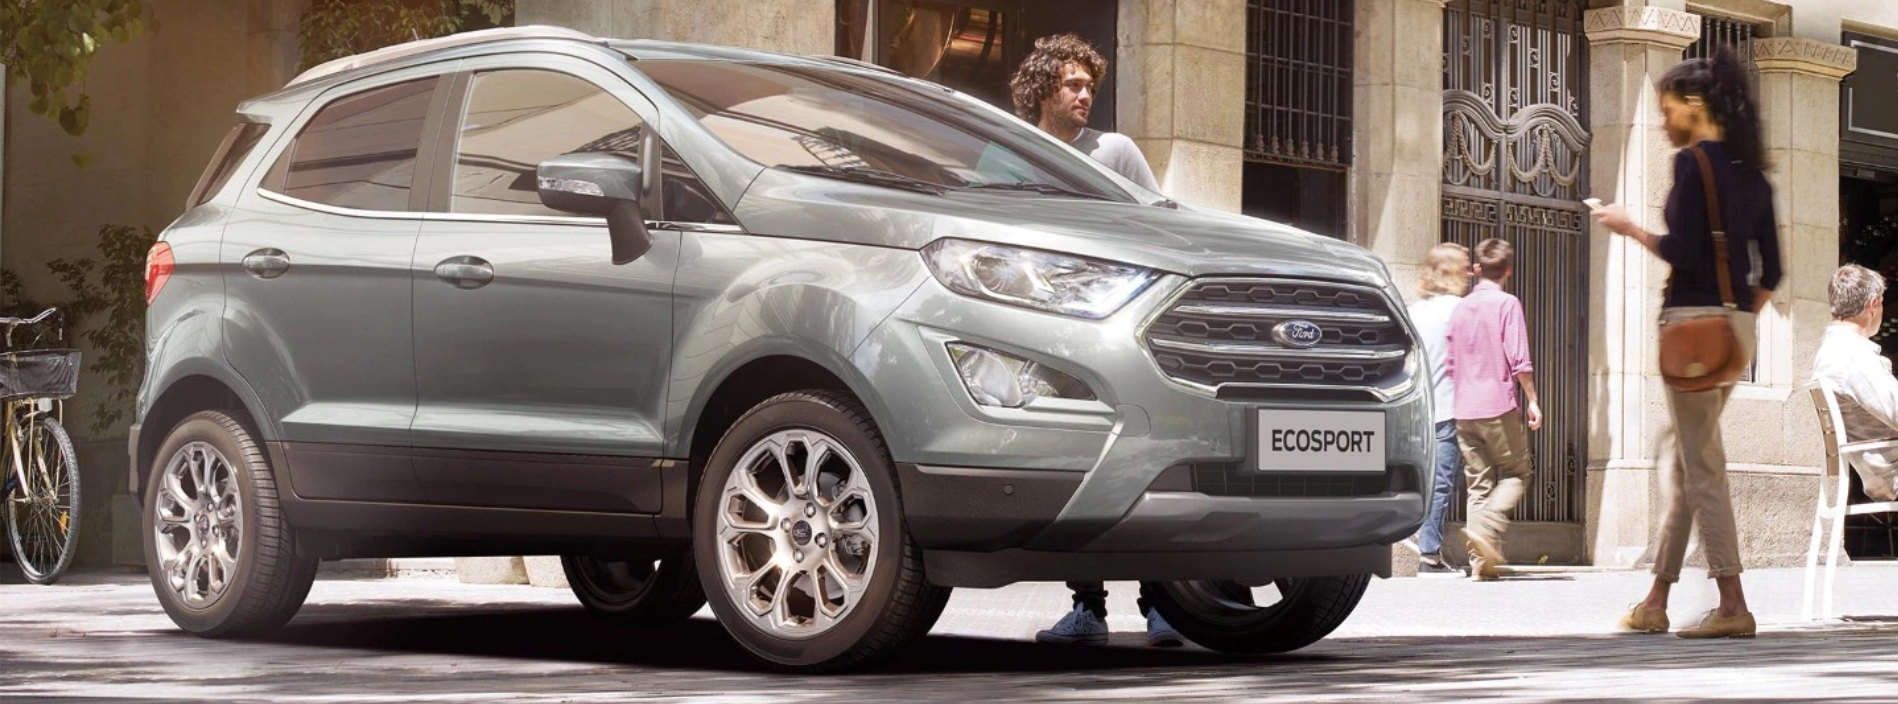 ford ecosport renting